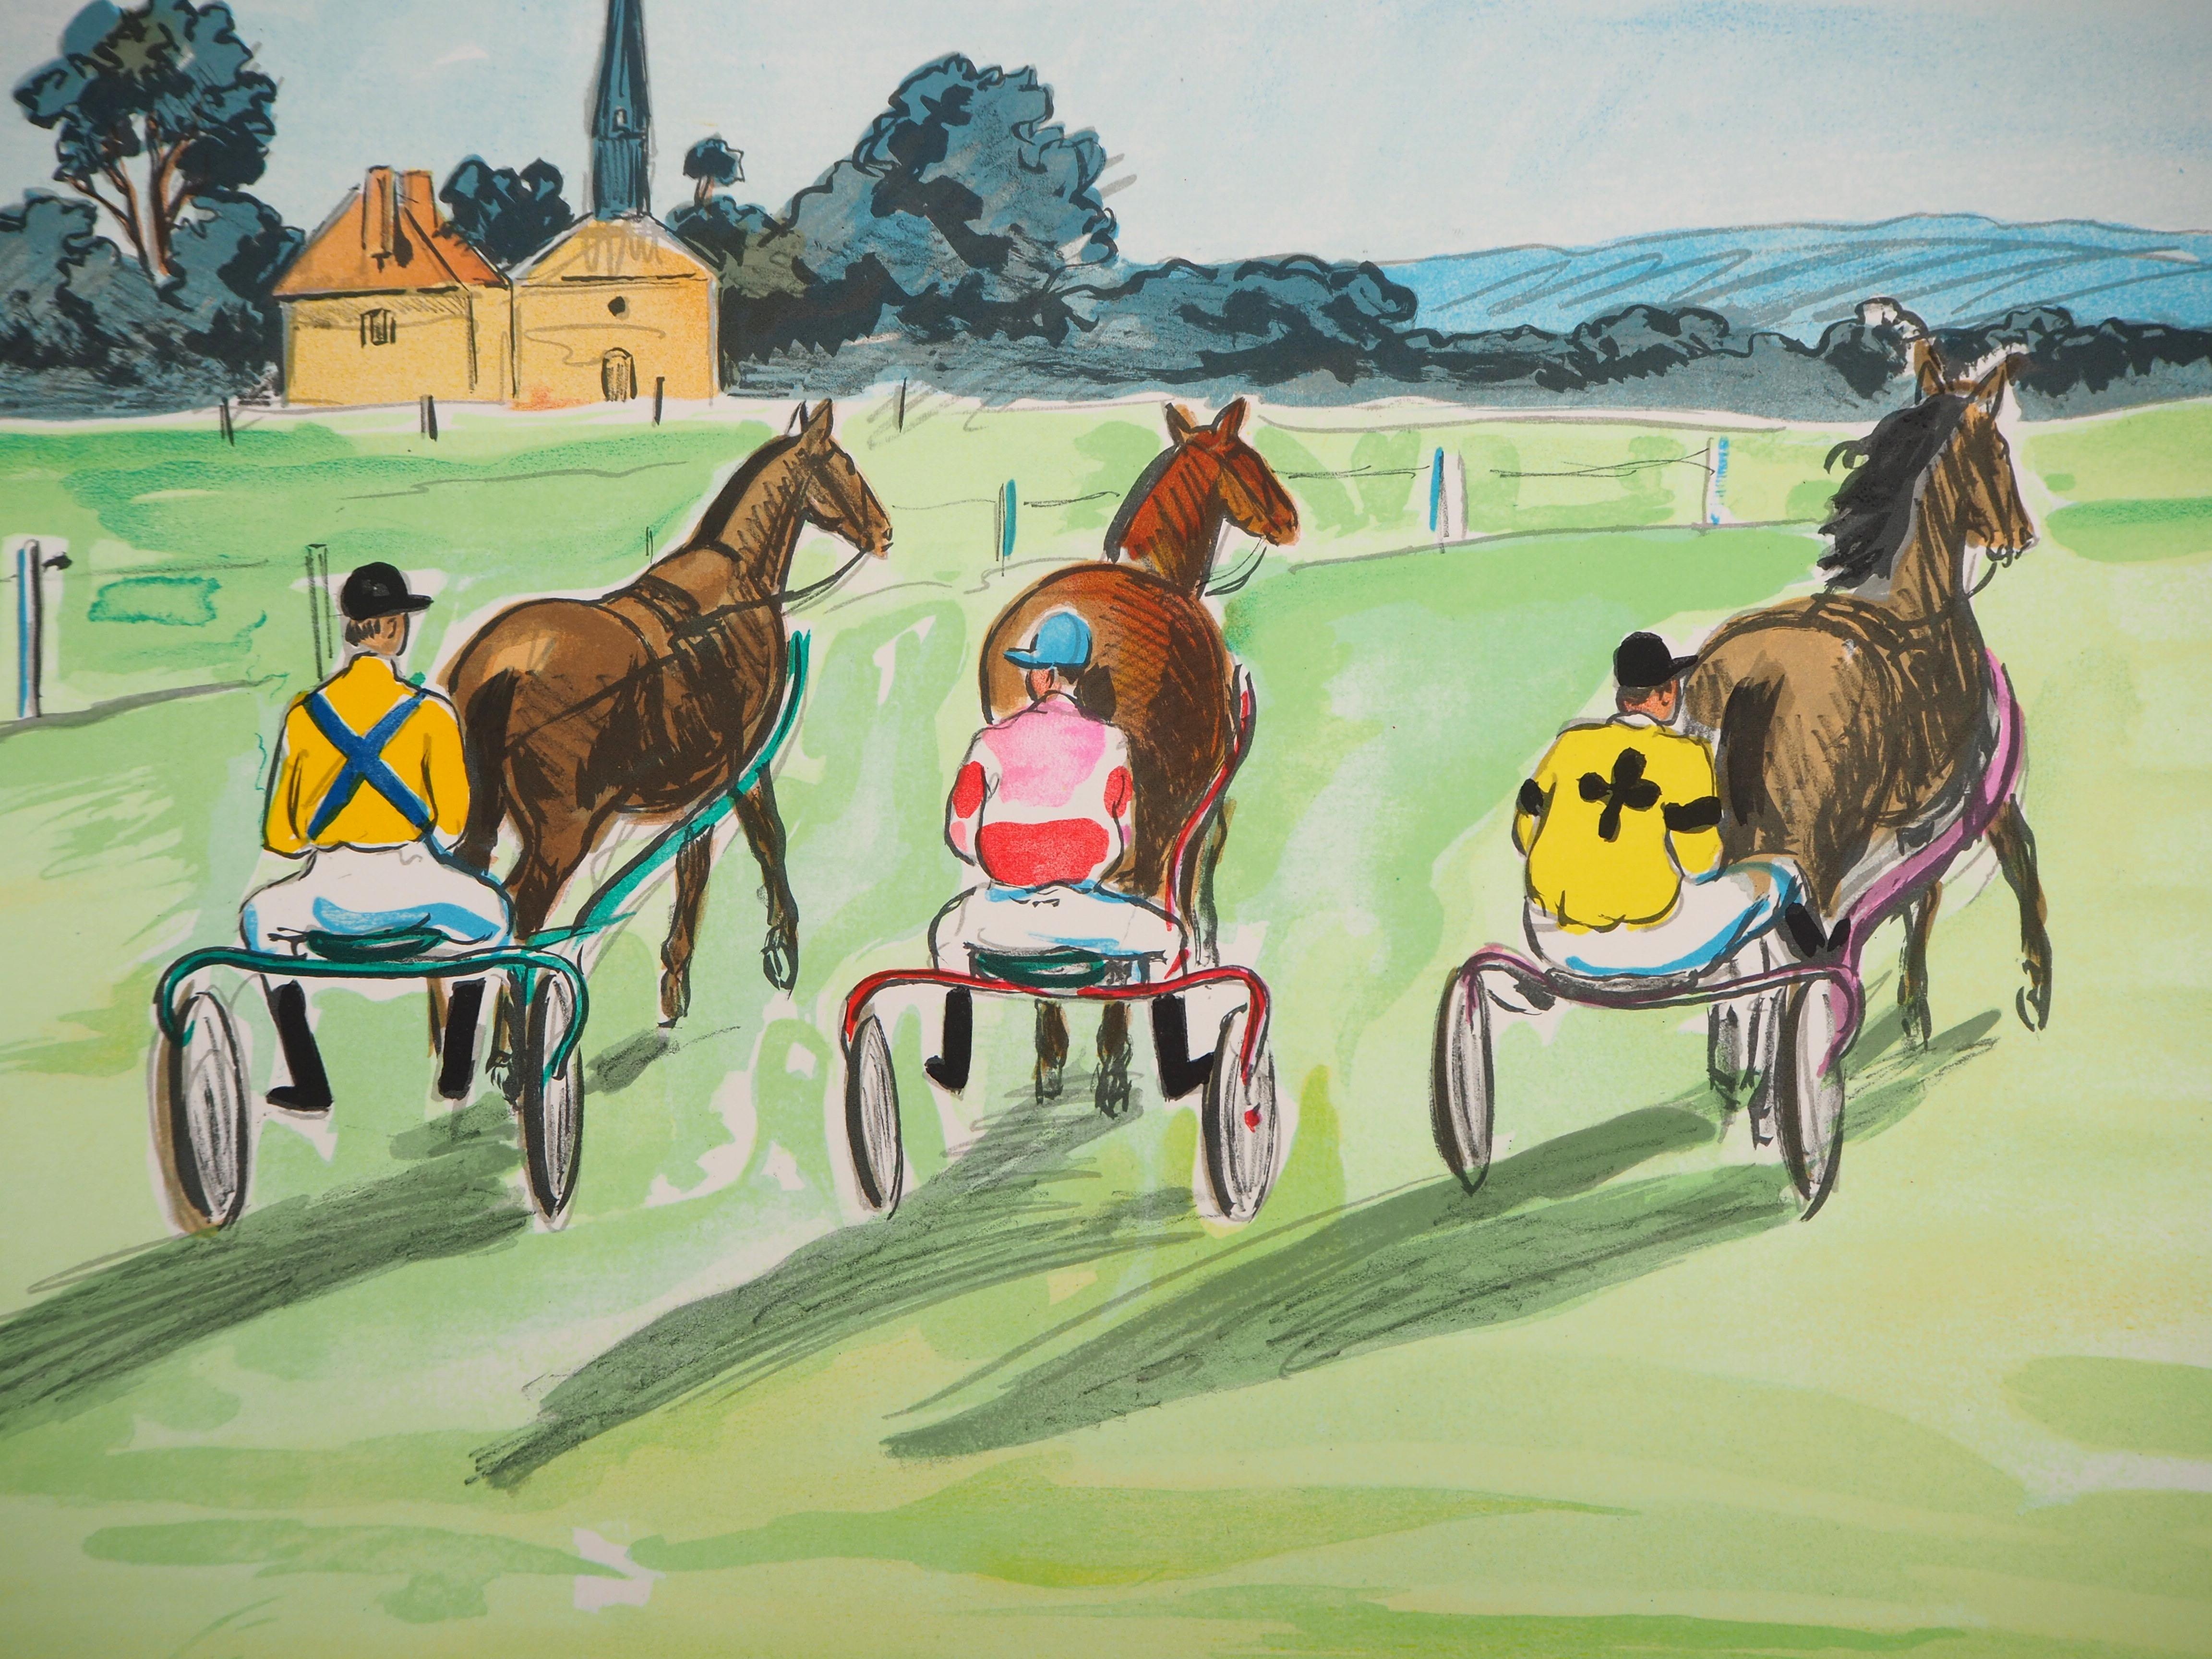 Yves Brayer (1907-1990)
Before the Trotting Race

Original lithograph, c.1973
Handsigned in pencil by the artist
Numbered /250 copies
Size 50 x 65 cm, on Arches Vellum

Information: From Paul Vialar's portfolio 